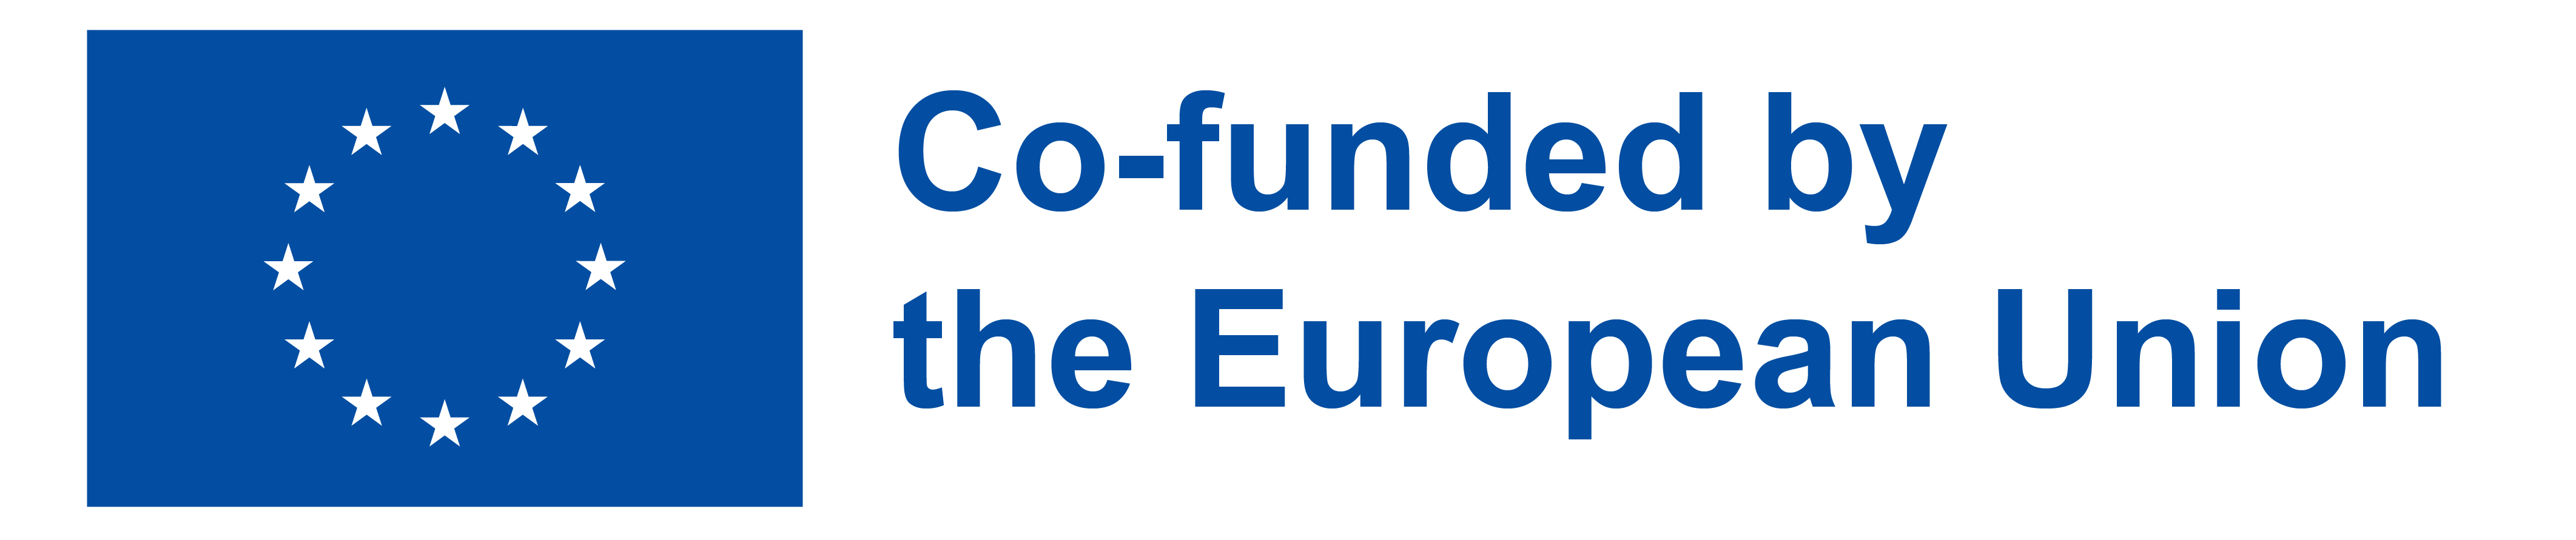 EN_Co-funded_by_the_EU